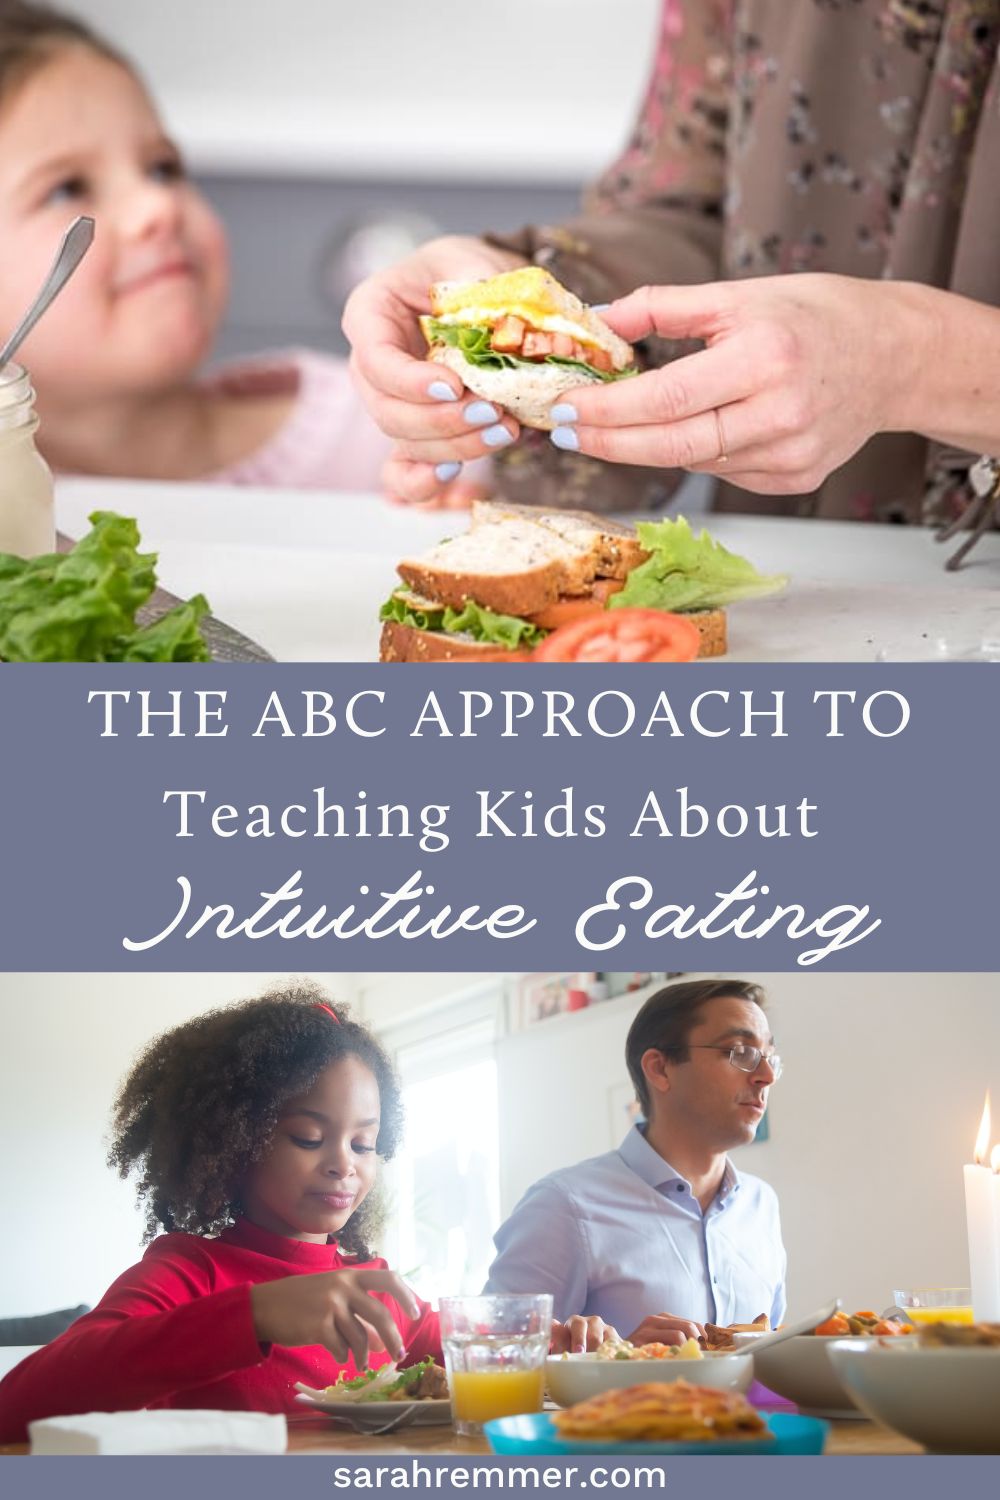 Learn how to raise children to become intuitive and mindful eaters using the ABC approach, plus intuitive eating tips for kids, picky eaters, and more.